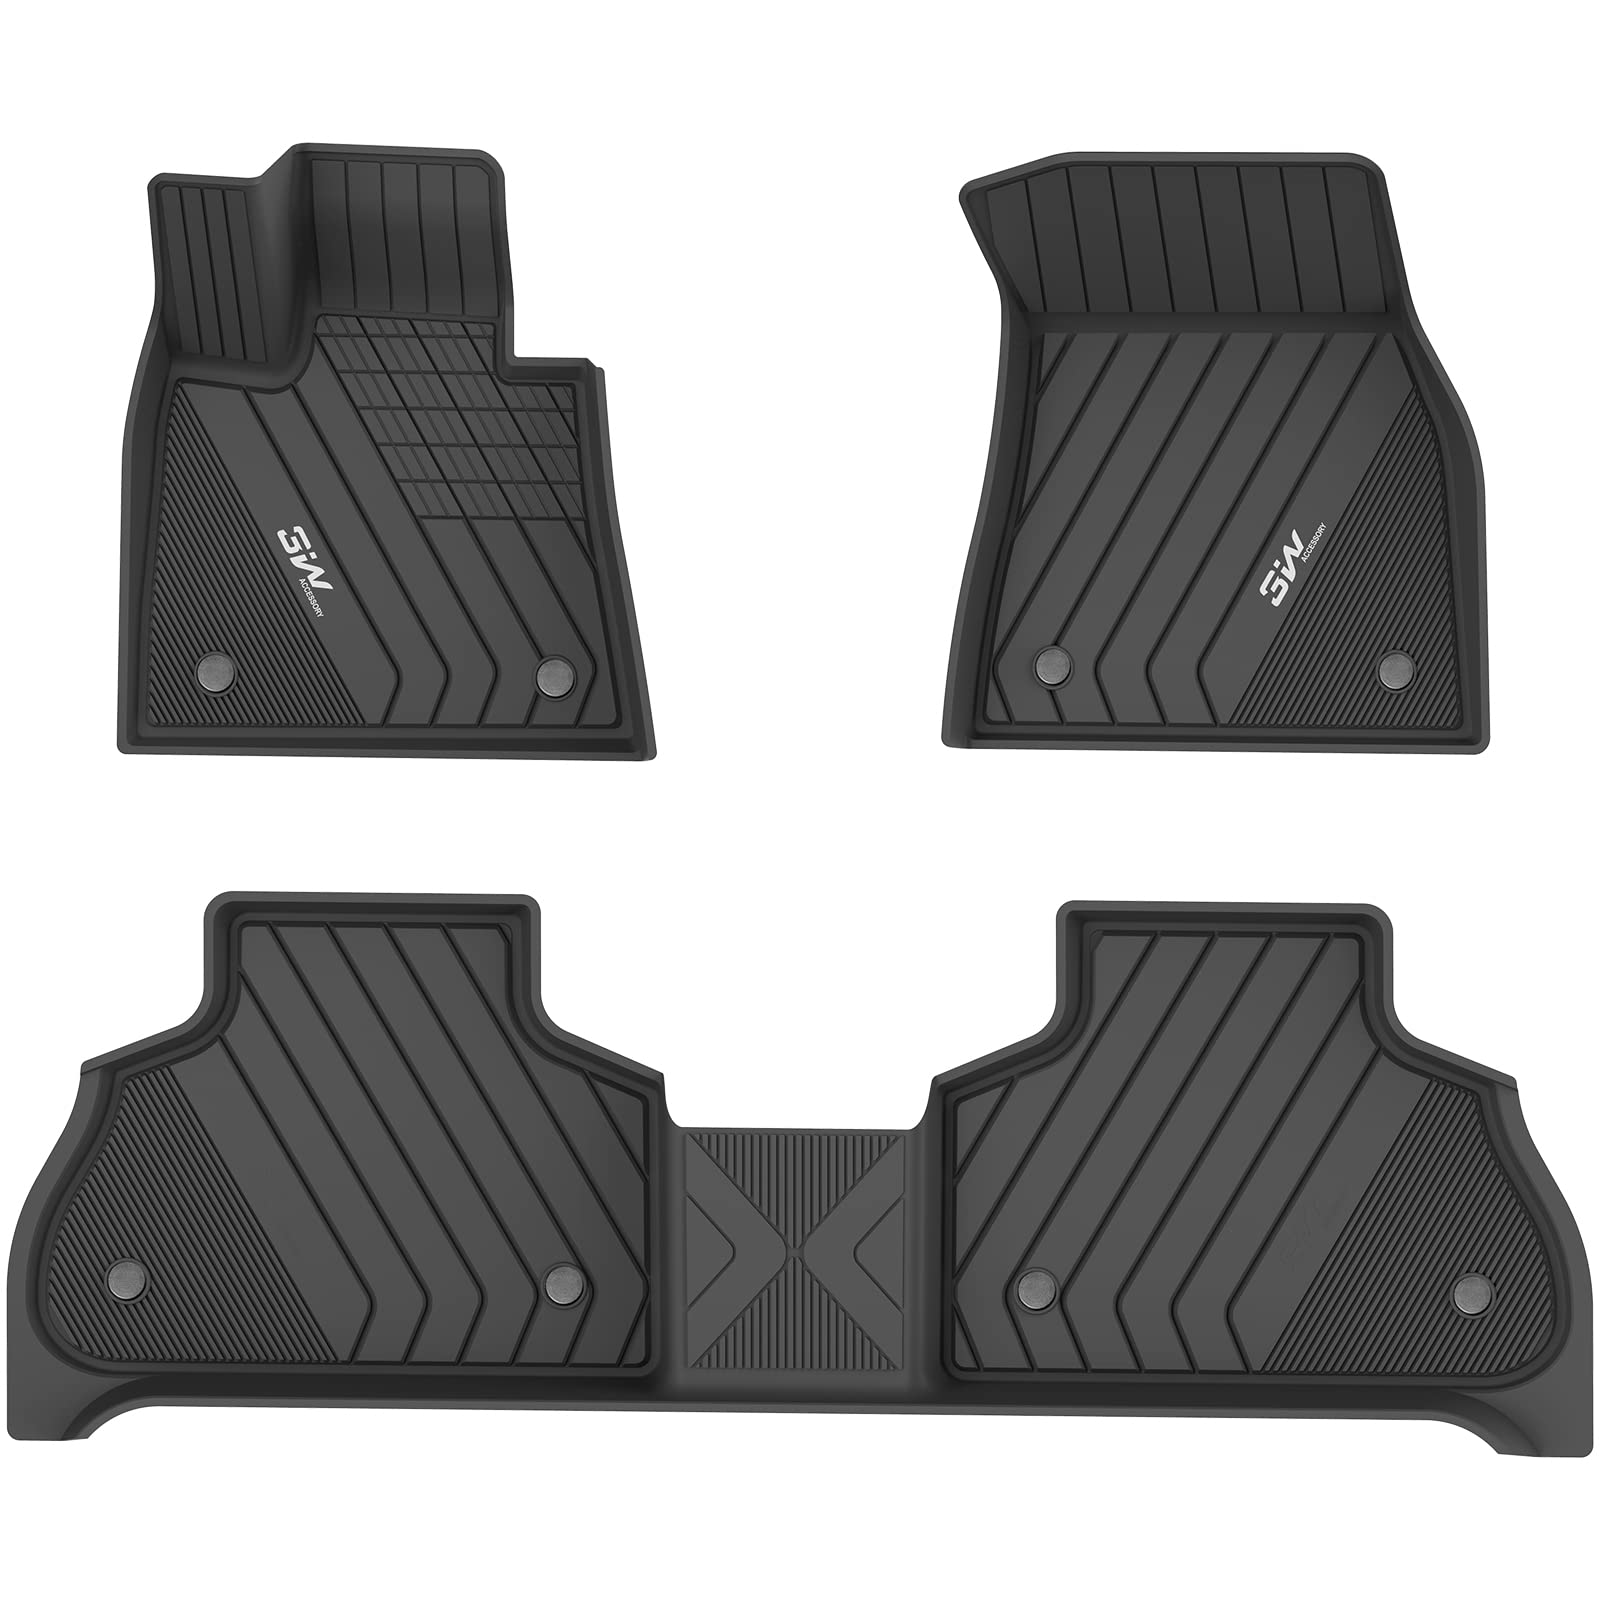 3W BMW X7 2019-2024 7 Seats 1st & 2nd Row Custom Floor Mats TPE Material & All-Weather Protection Vehicles & Parts 3Wliners 2019-2024 7-Seat X7 1st&2nd Row Mats